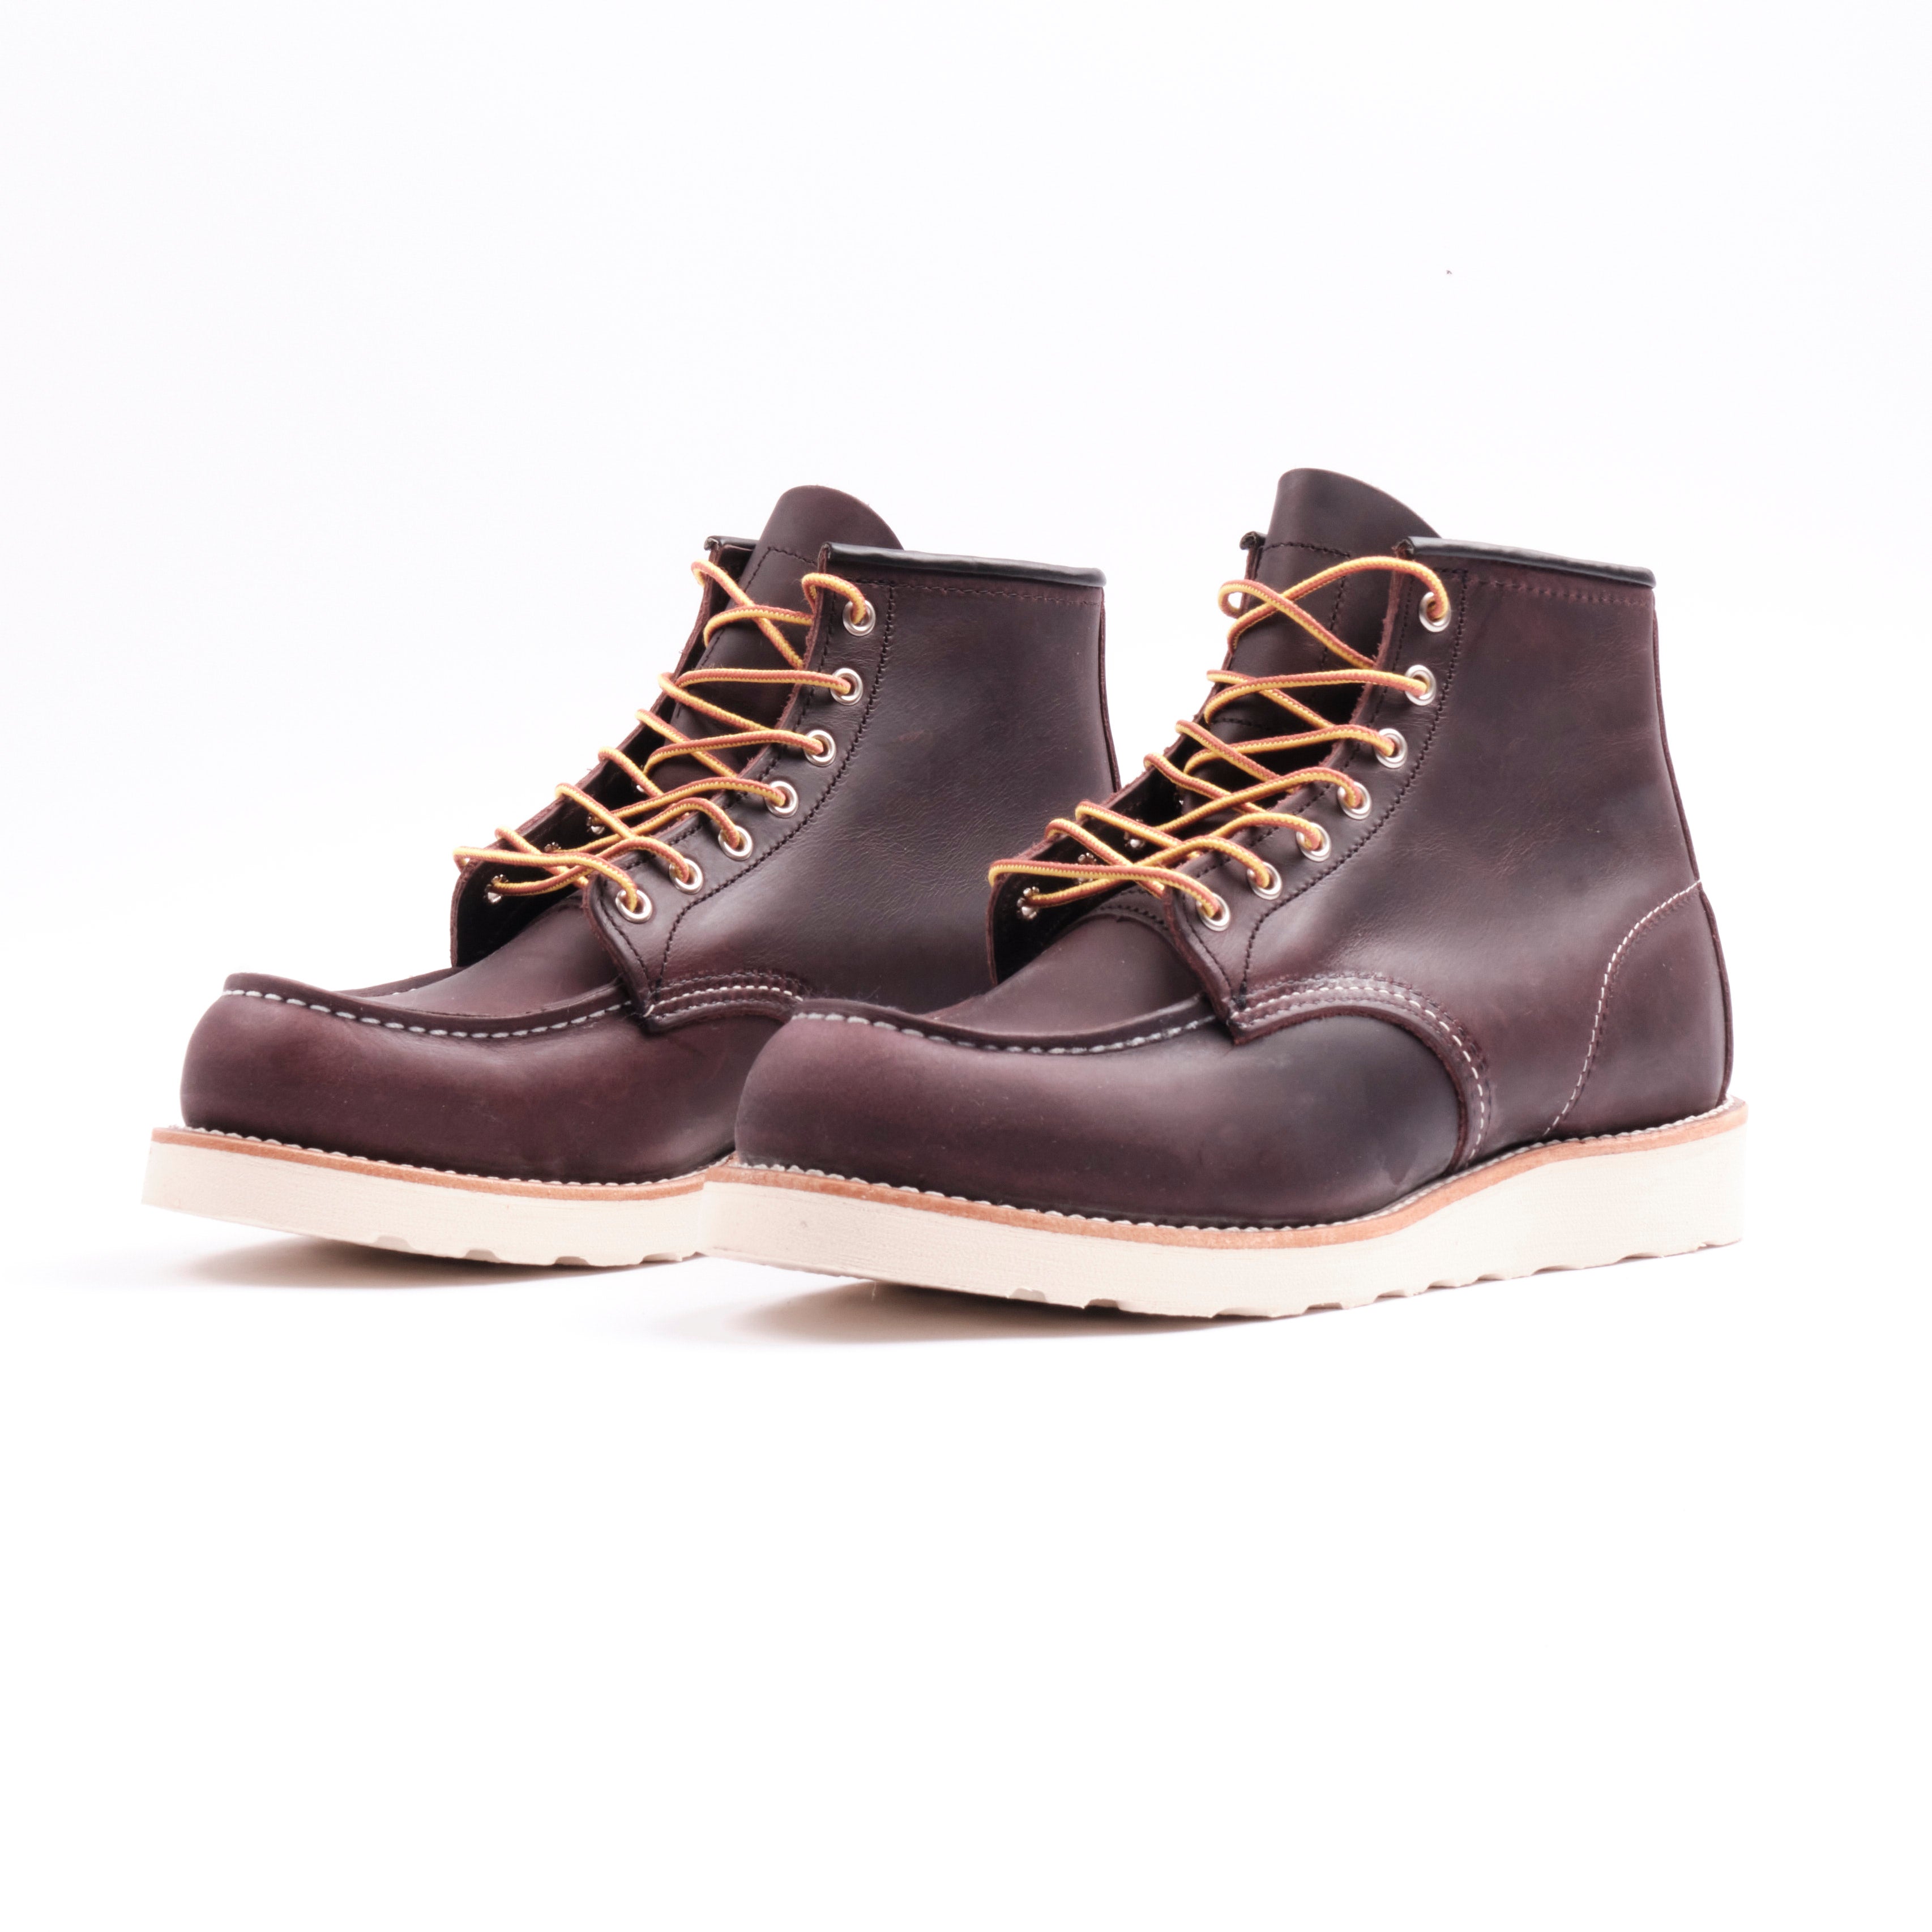 Red Wing Heritage 6" Classic Moc Toe - Black Cherry Excalibur Leather 8847